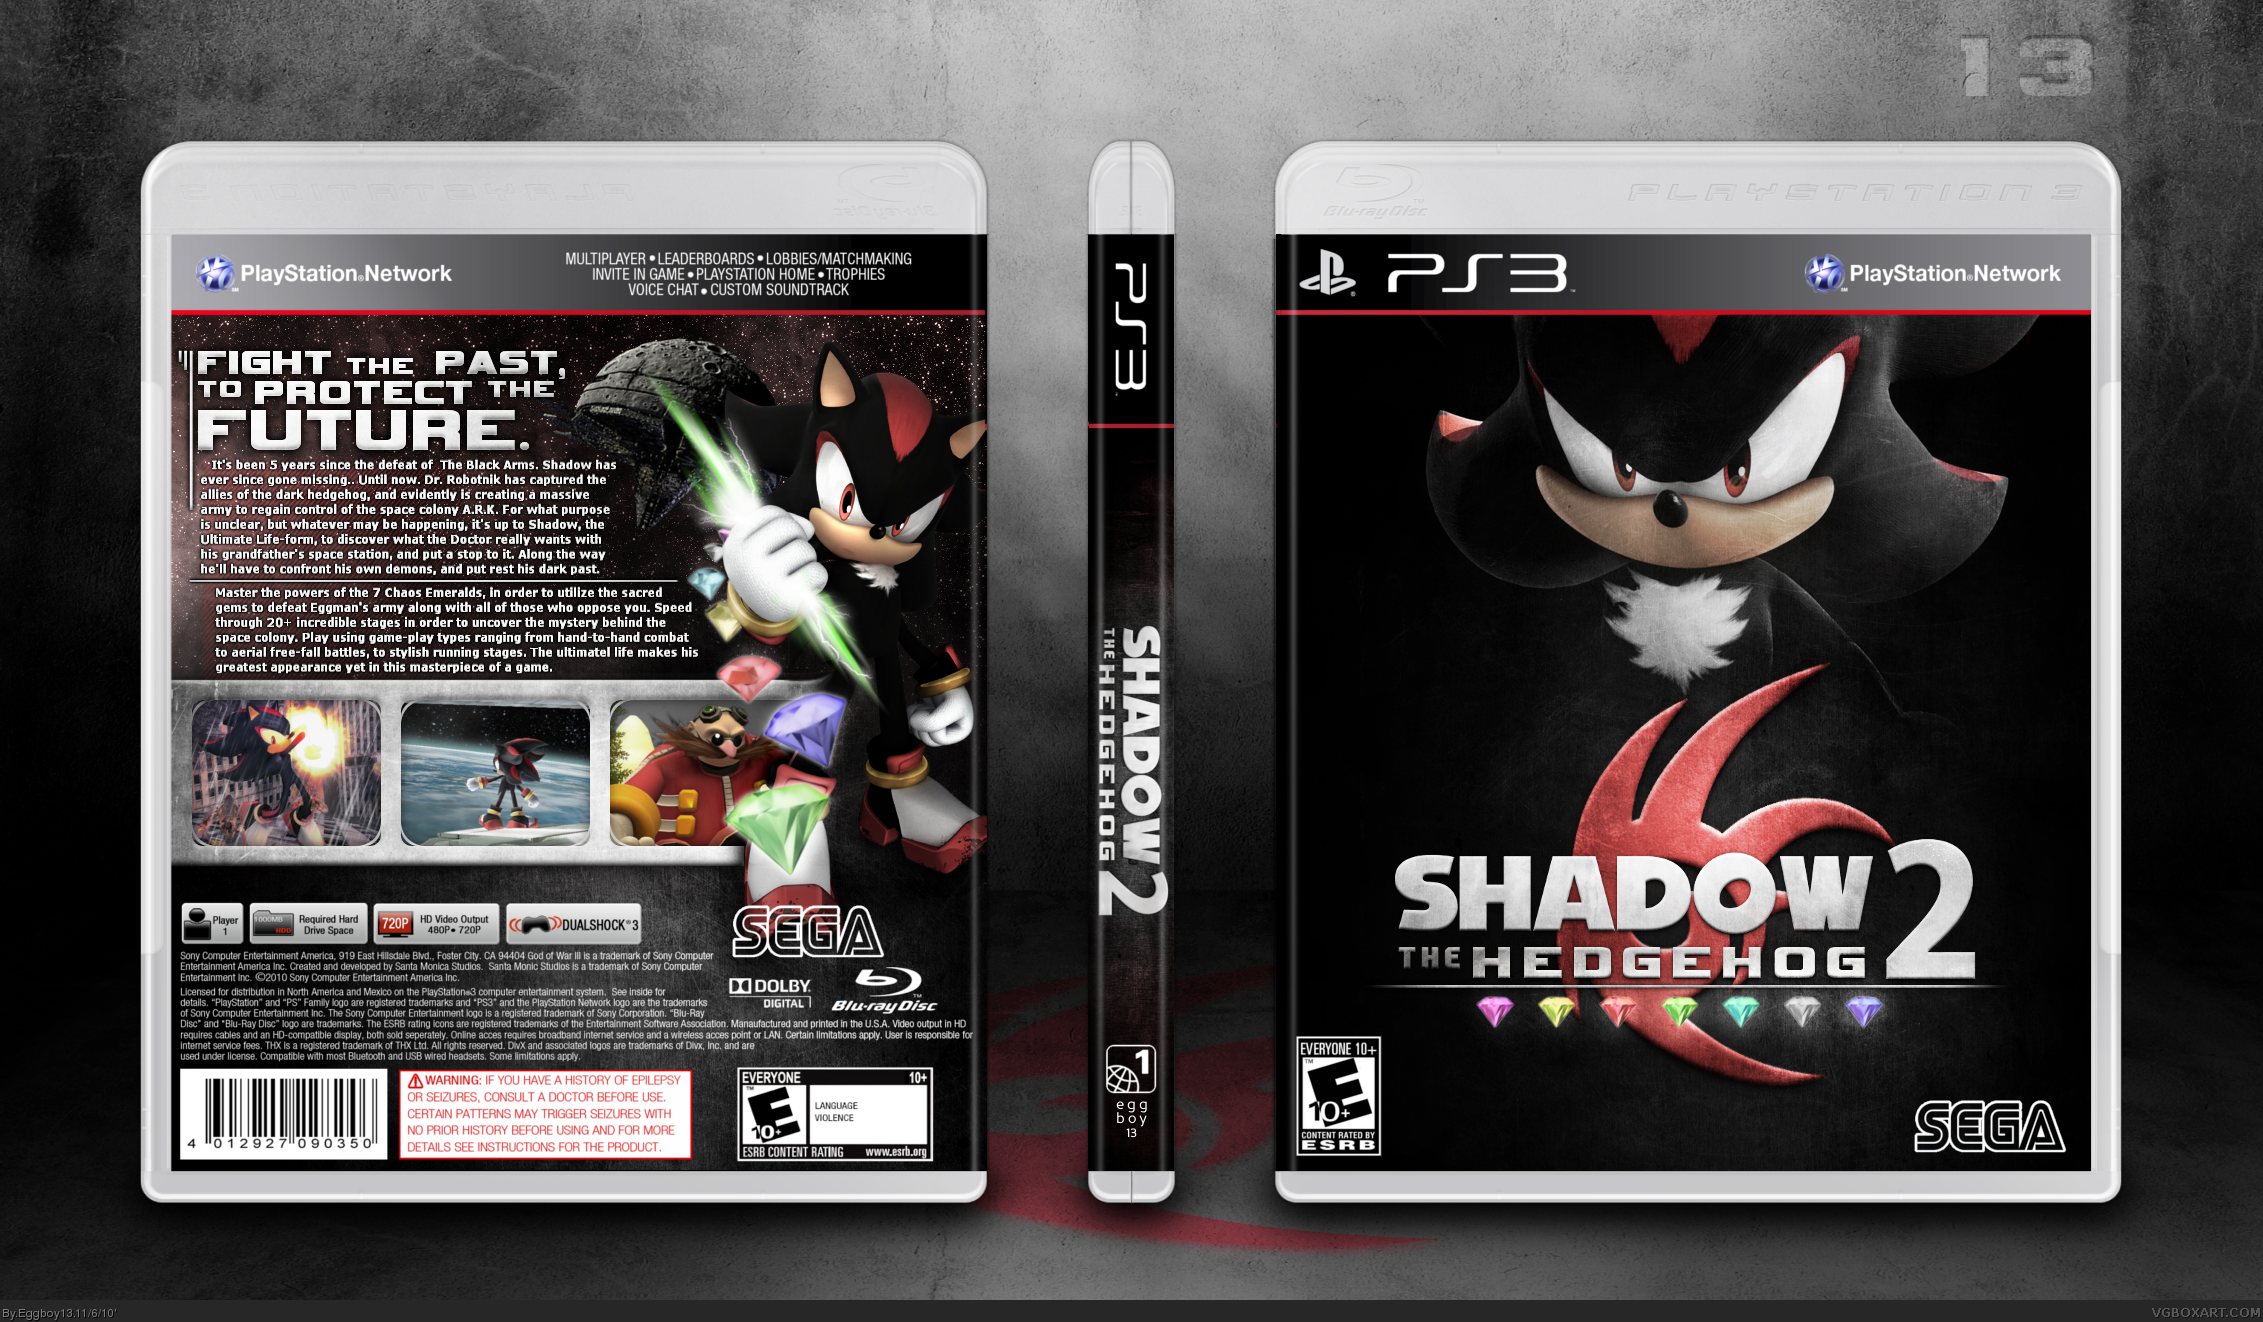 Шедоу ps2. Shadow the Hedgehog ps3. Shadow the Hedgehog игра диск. Shadow the Hedgehog ps2 диск. X game shadow